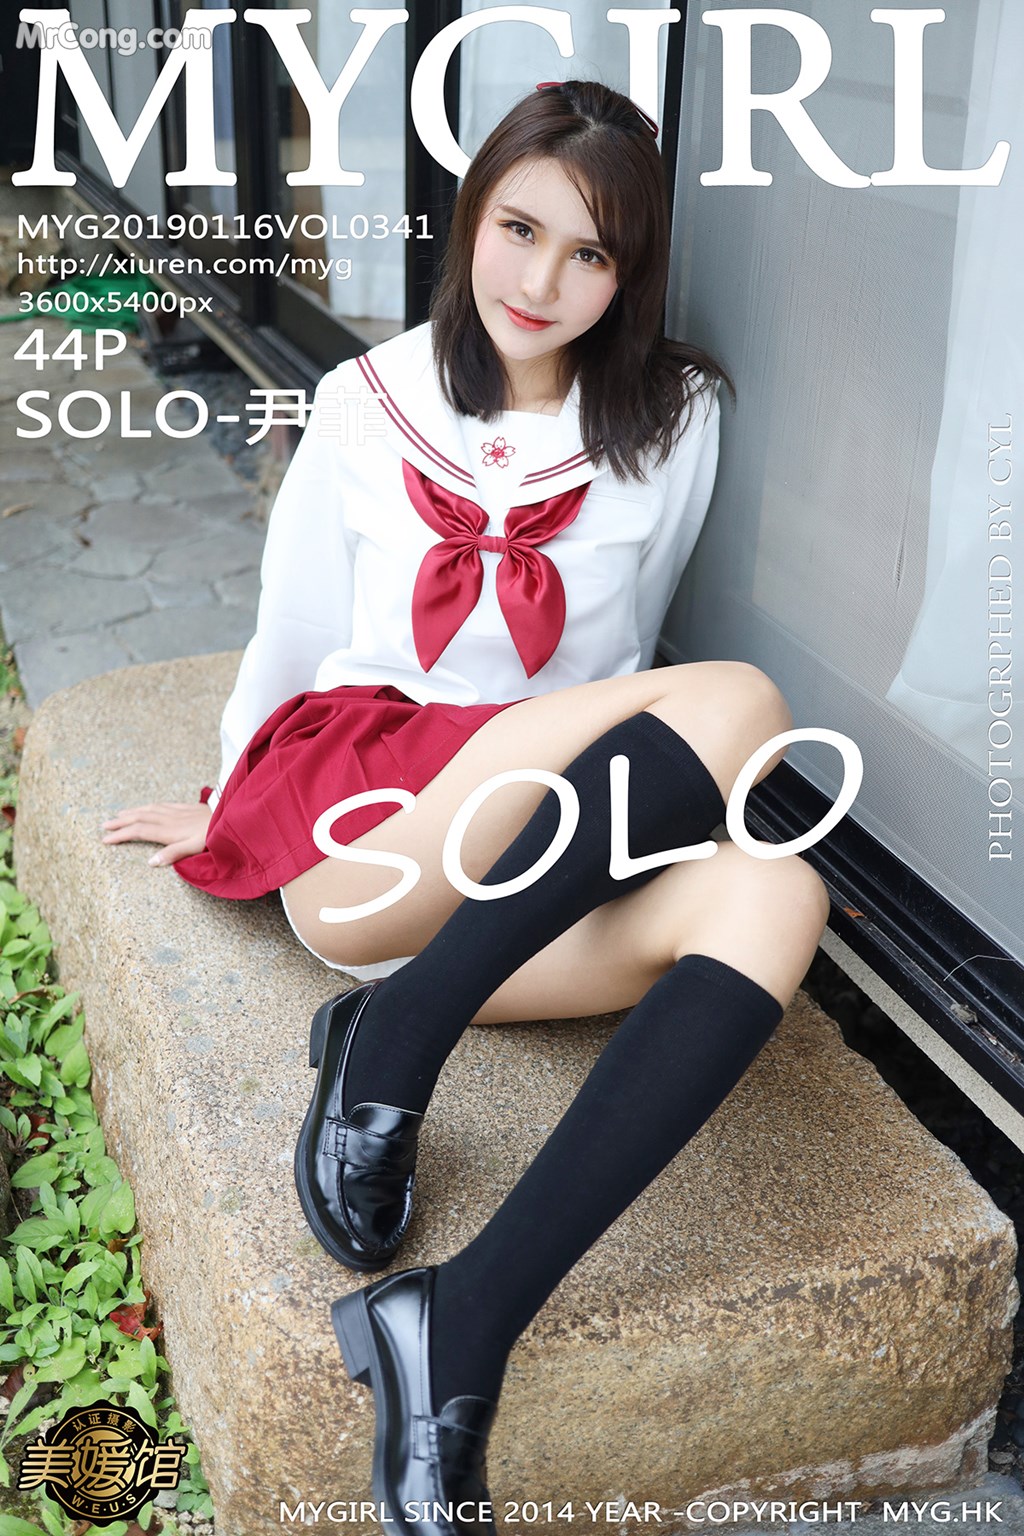 MyGirl Vol.341: Model SOLO-尹菲 (45 pictures) photo 3-4